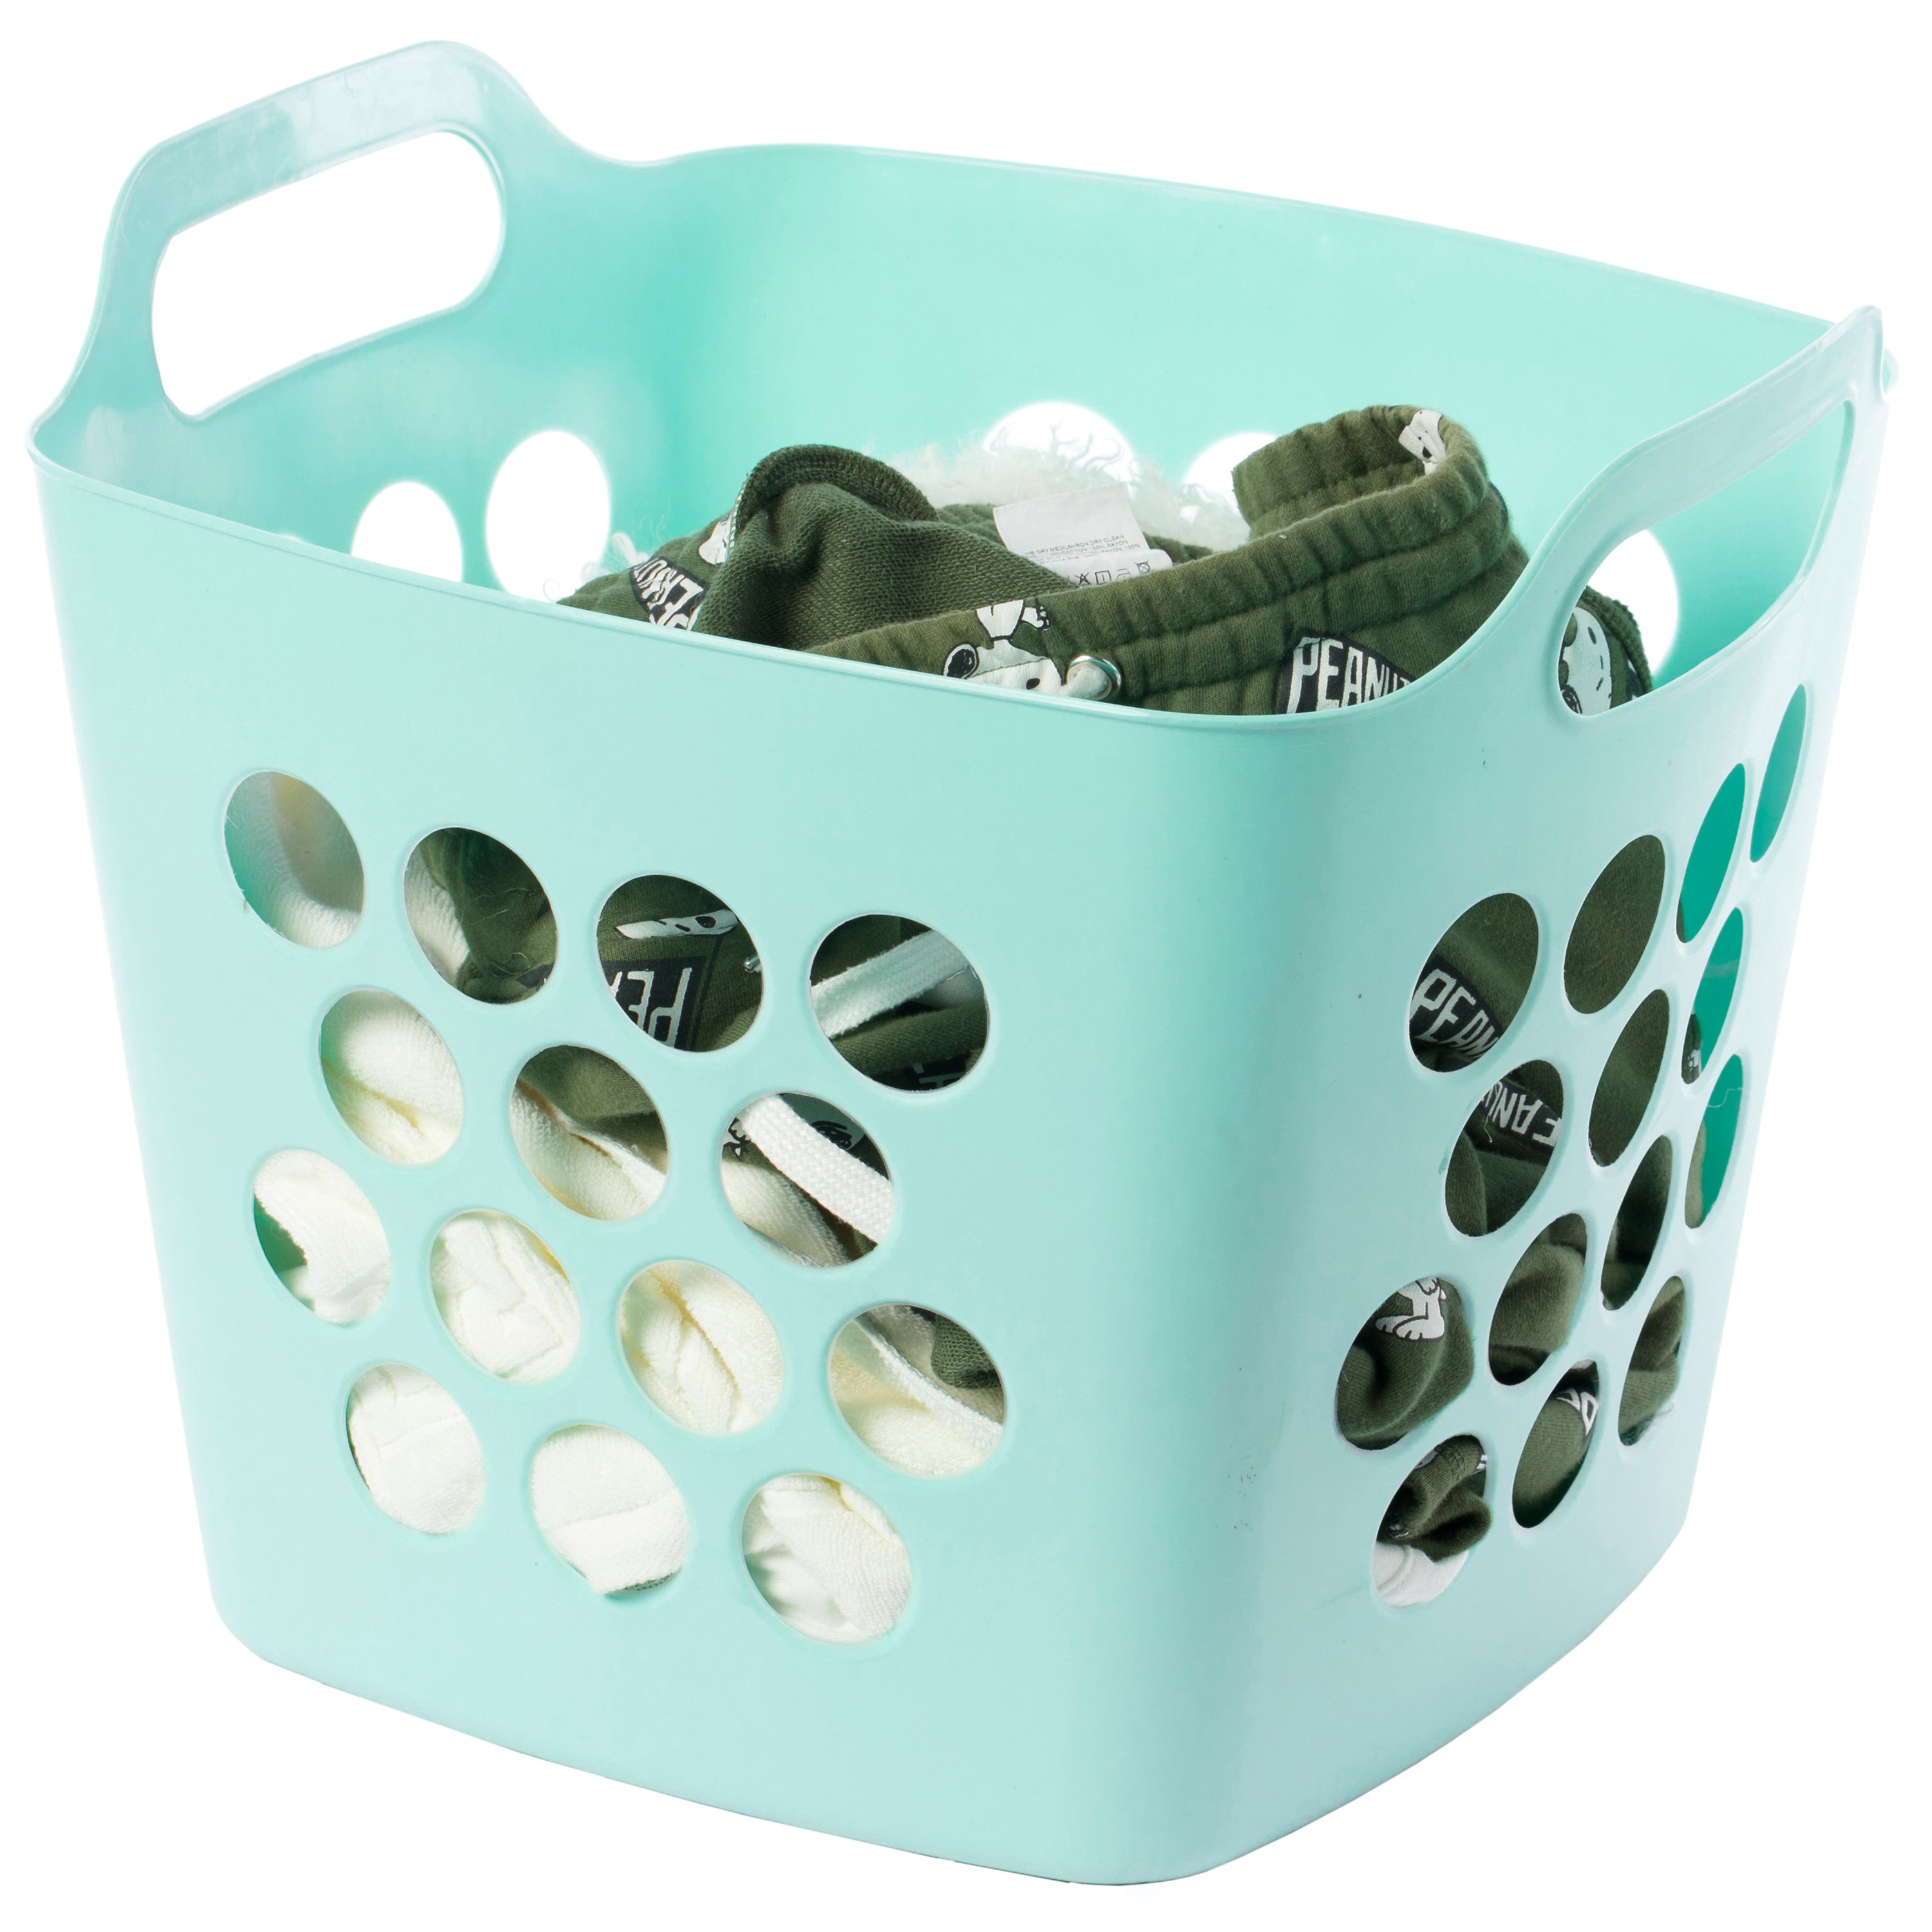 Flexible Plastic Carry Laundry Basket Holder Square Storage Hamper With Side Handles - Green